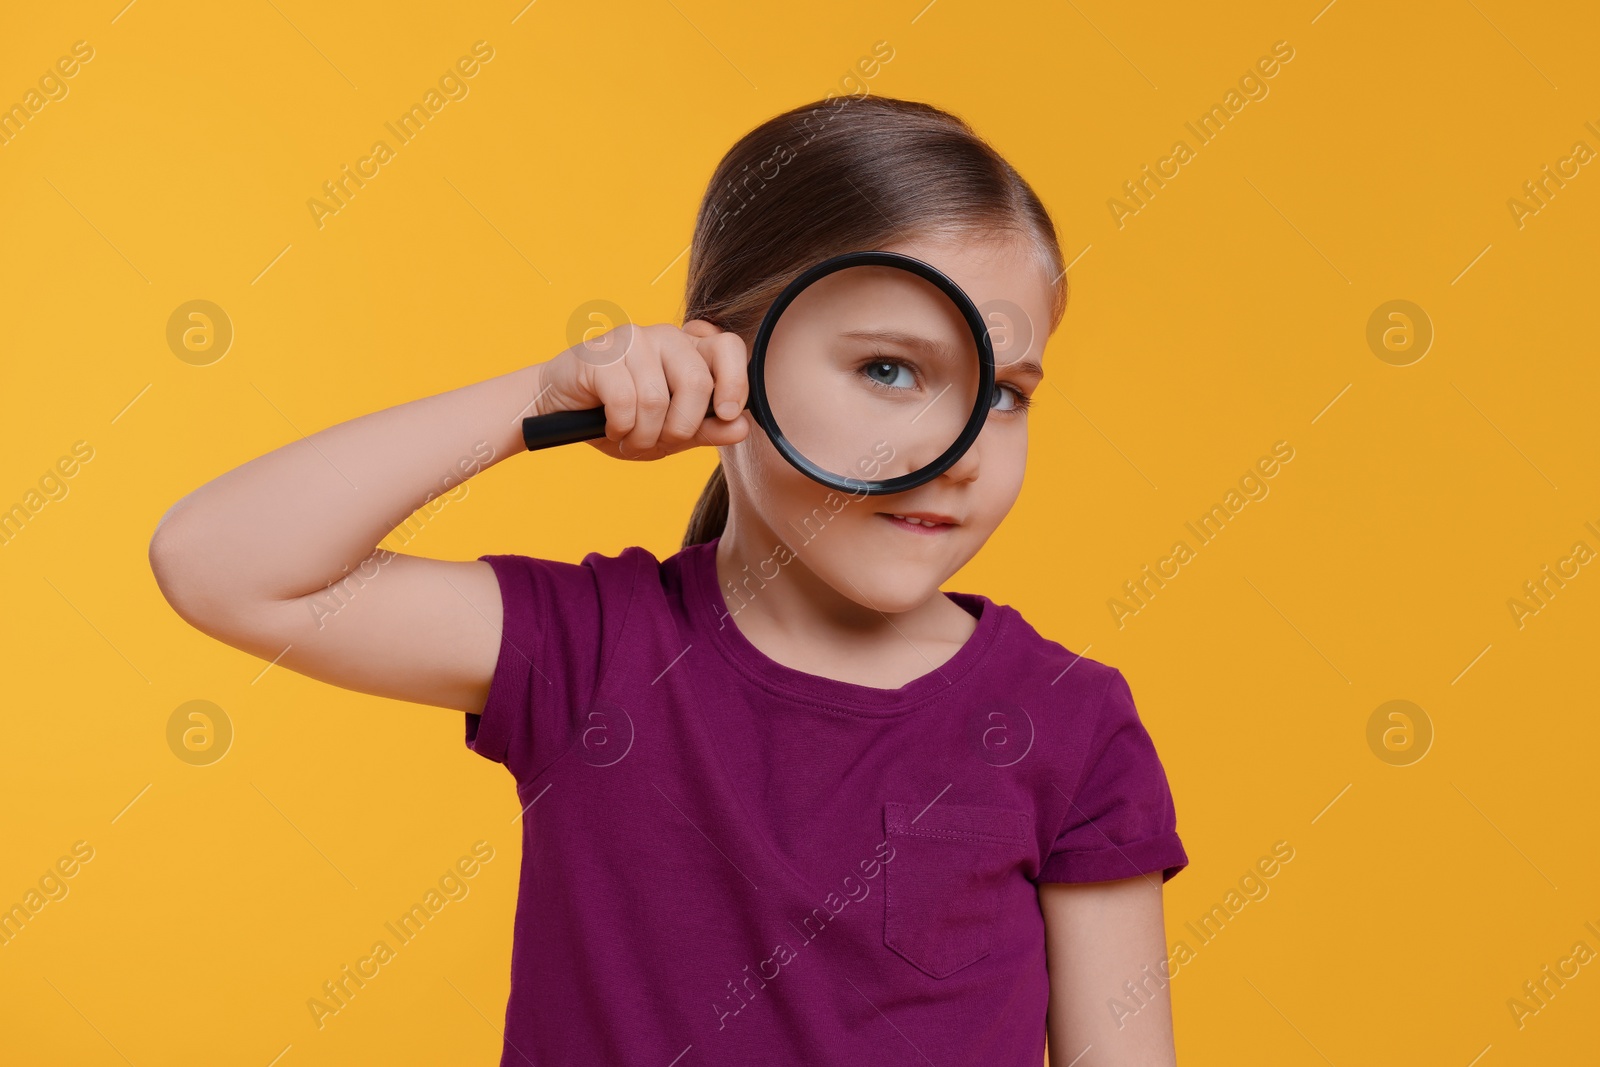 Photo of Cute little girl looking through magnifier on orange background